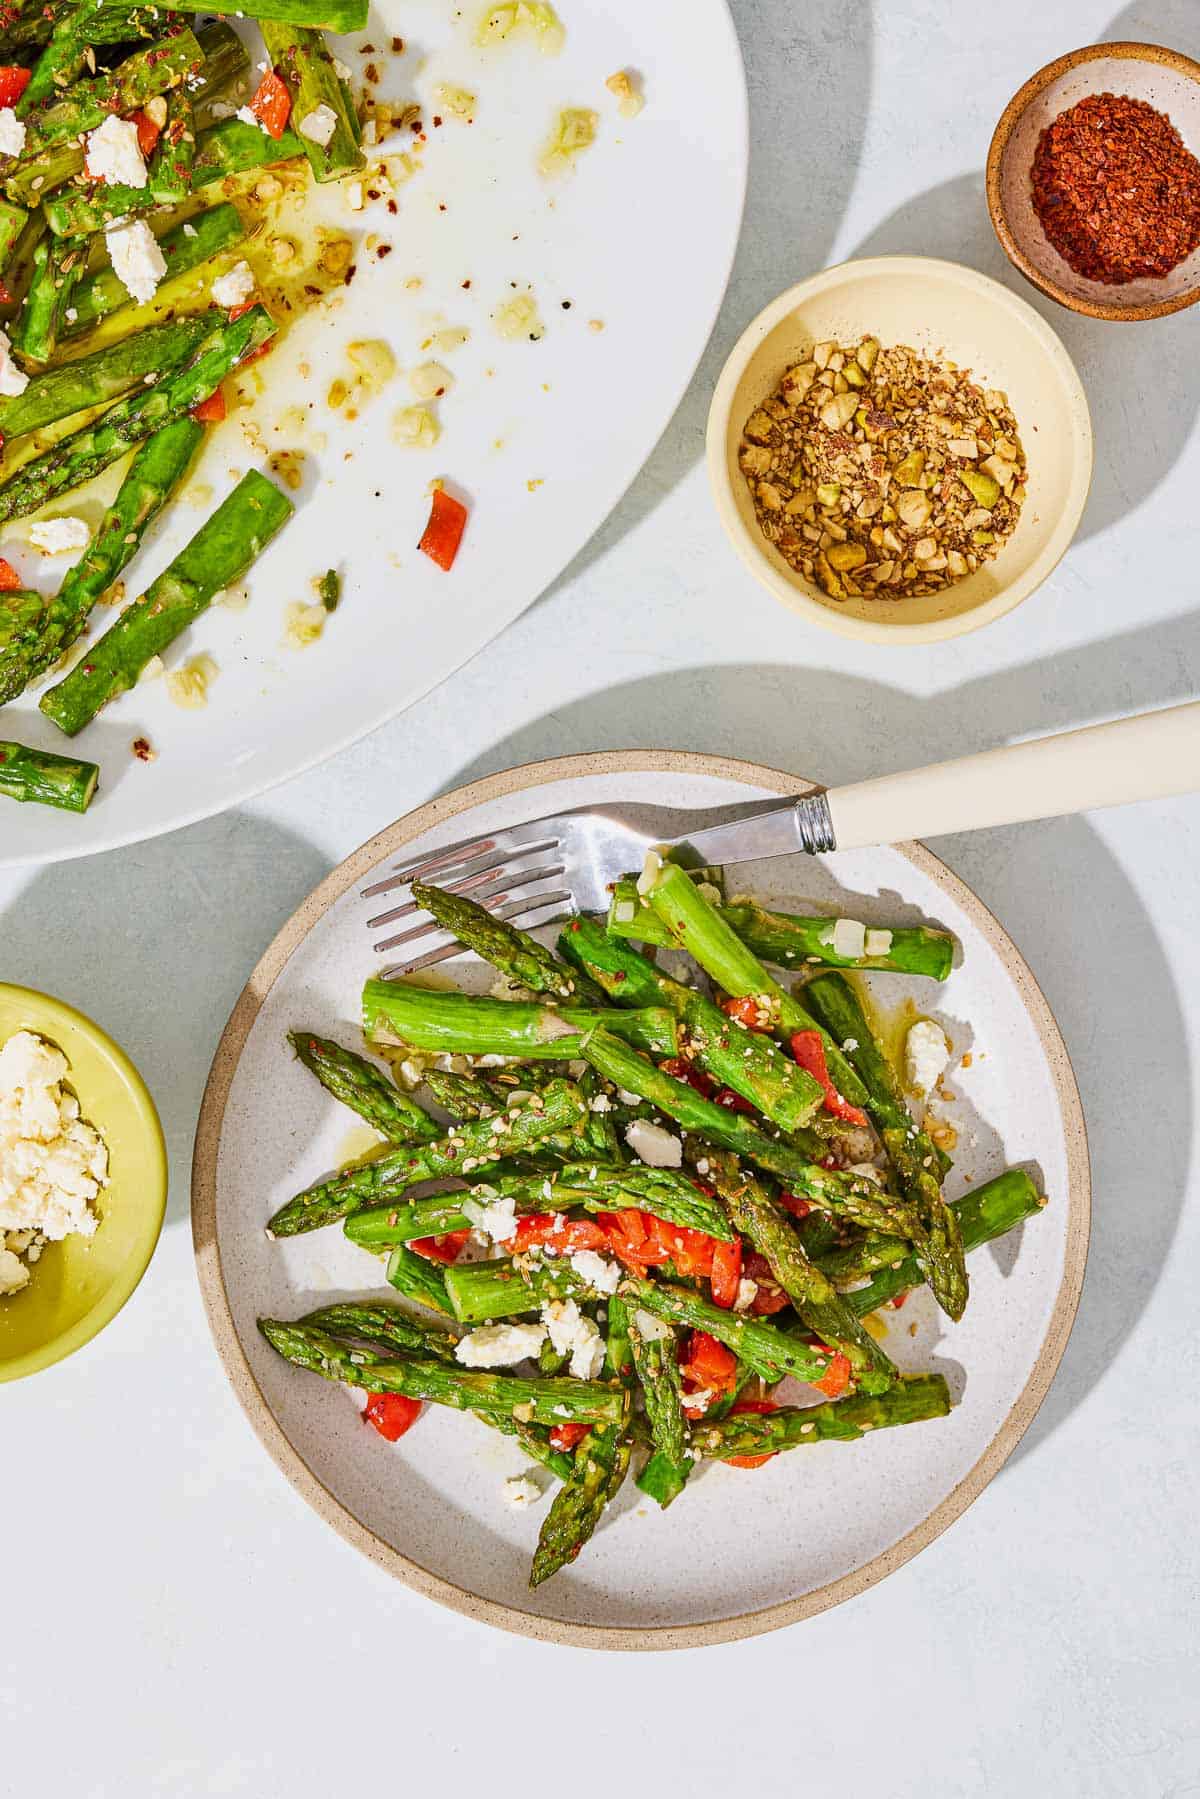 An overhead photo of a serving of sauteed asparagus topped with chopped red peppers and crumbled feta on a plate with a fork. Next to this is a platter with the rest of the asparagus and small bowls of crumbled feta, za'atar and aleppo pepper.